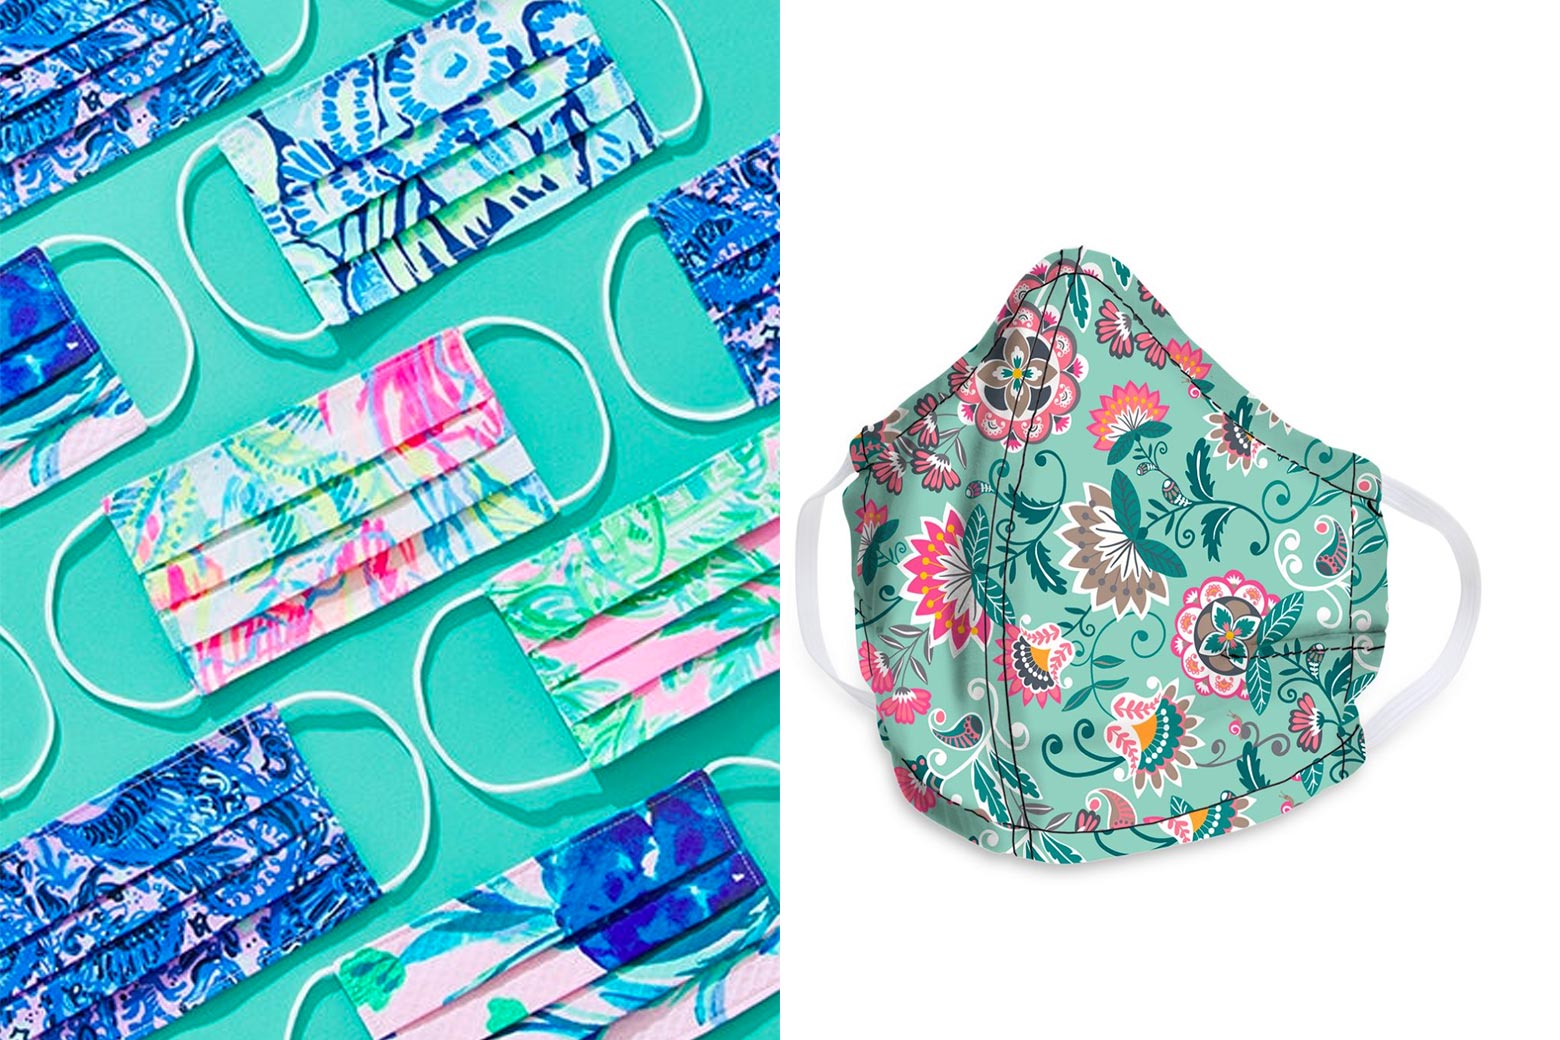 Side-by-side photos of colorful patterned masks by Lilly Pulitzer and a blue face mask with a pink paisley design by Vera Bradley